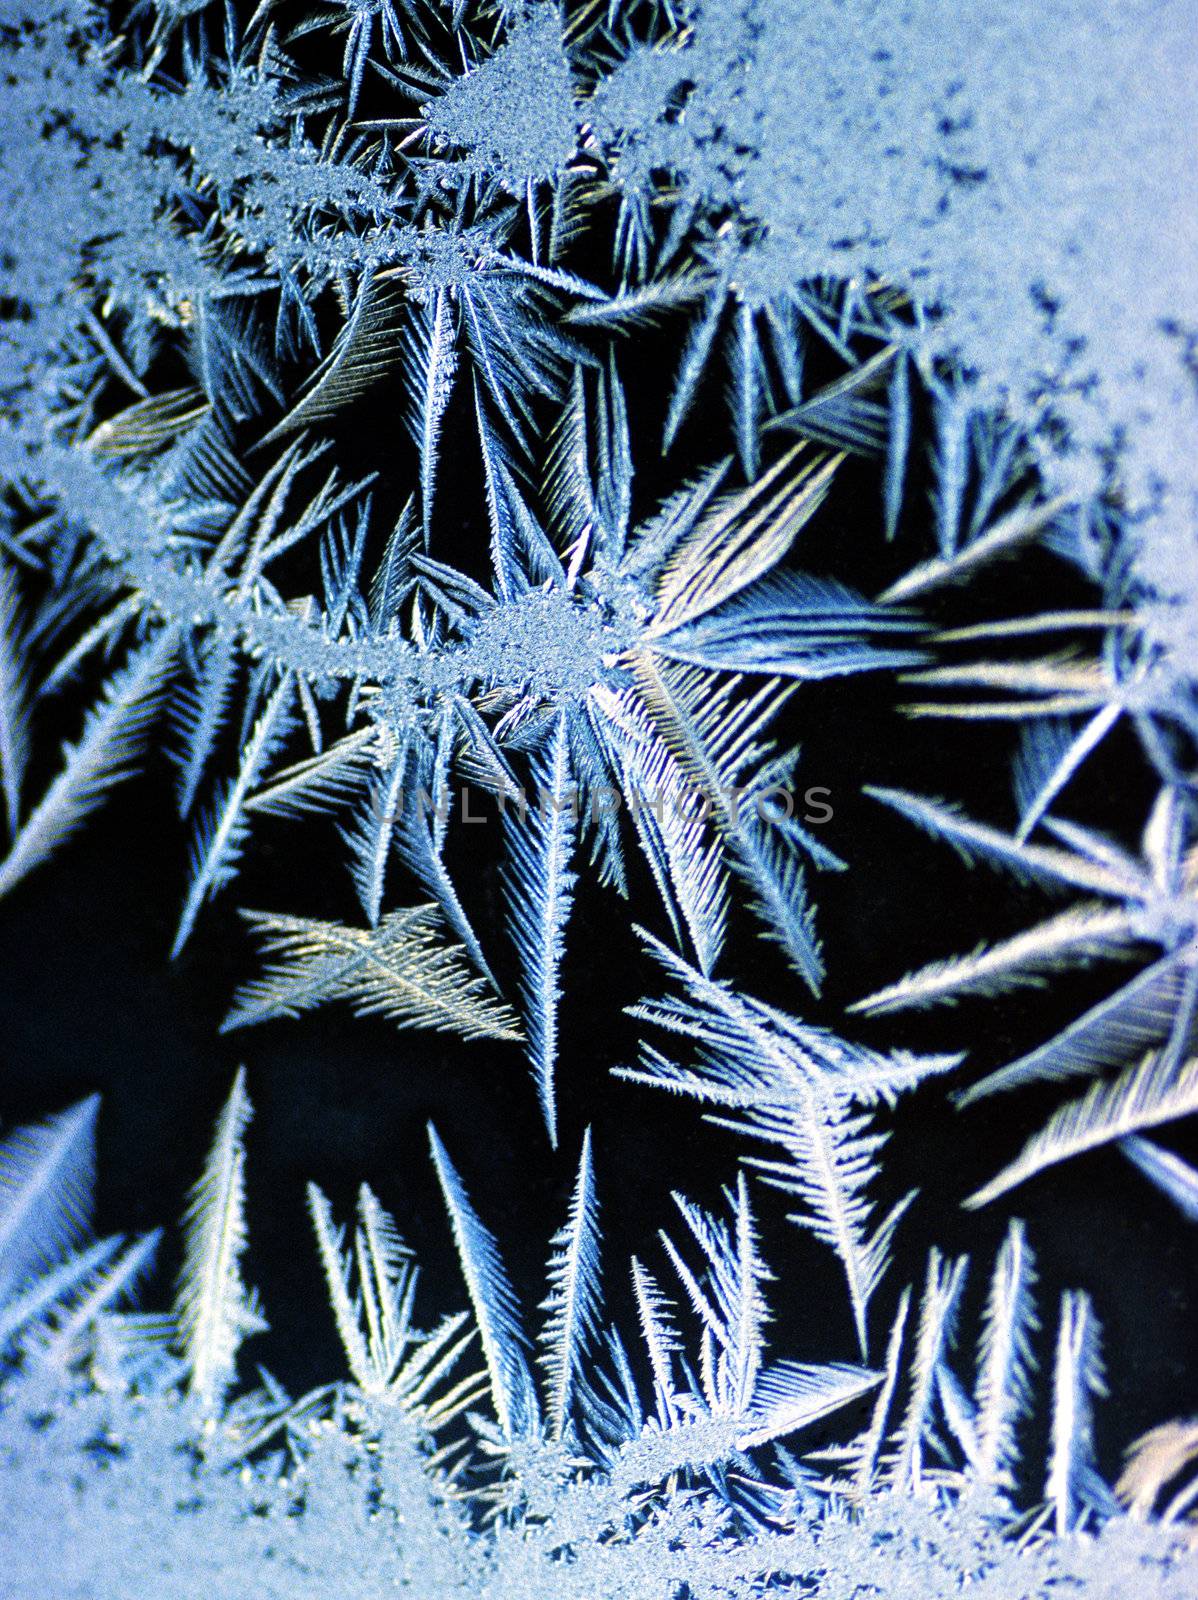 Frost on window by f/2sumicron